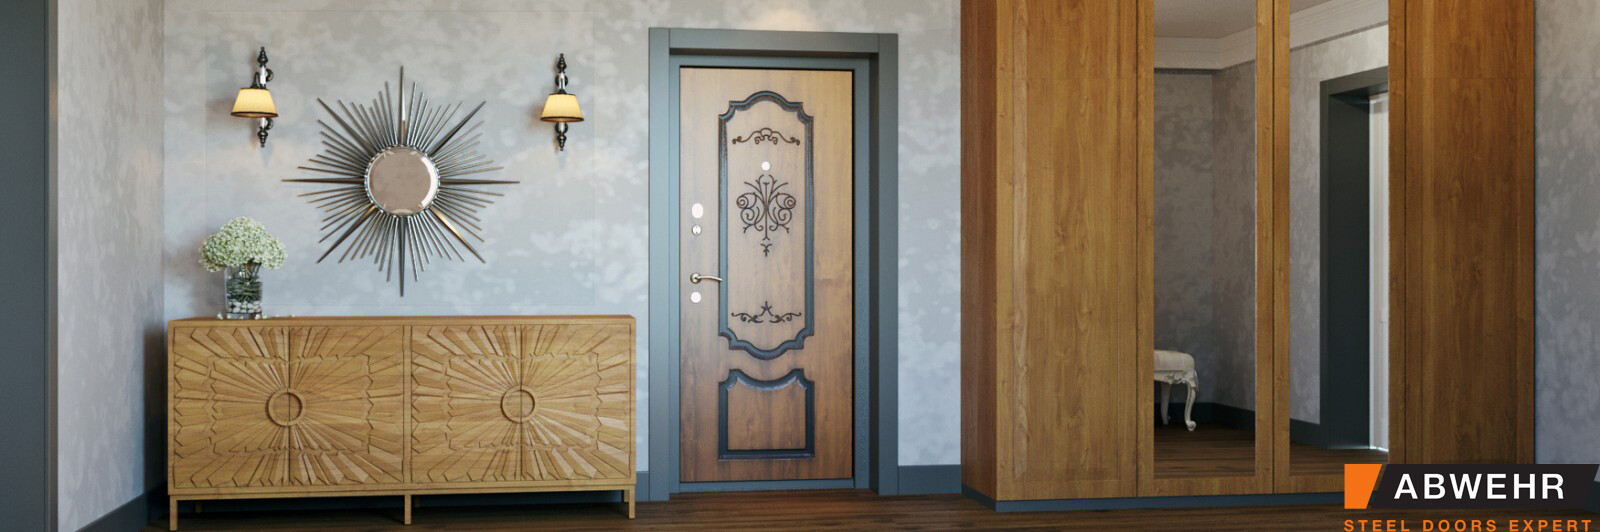 Doors Abwehr Blanca with patina photo in the interior